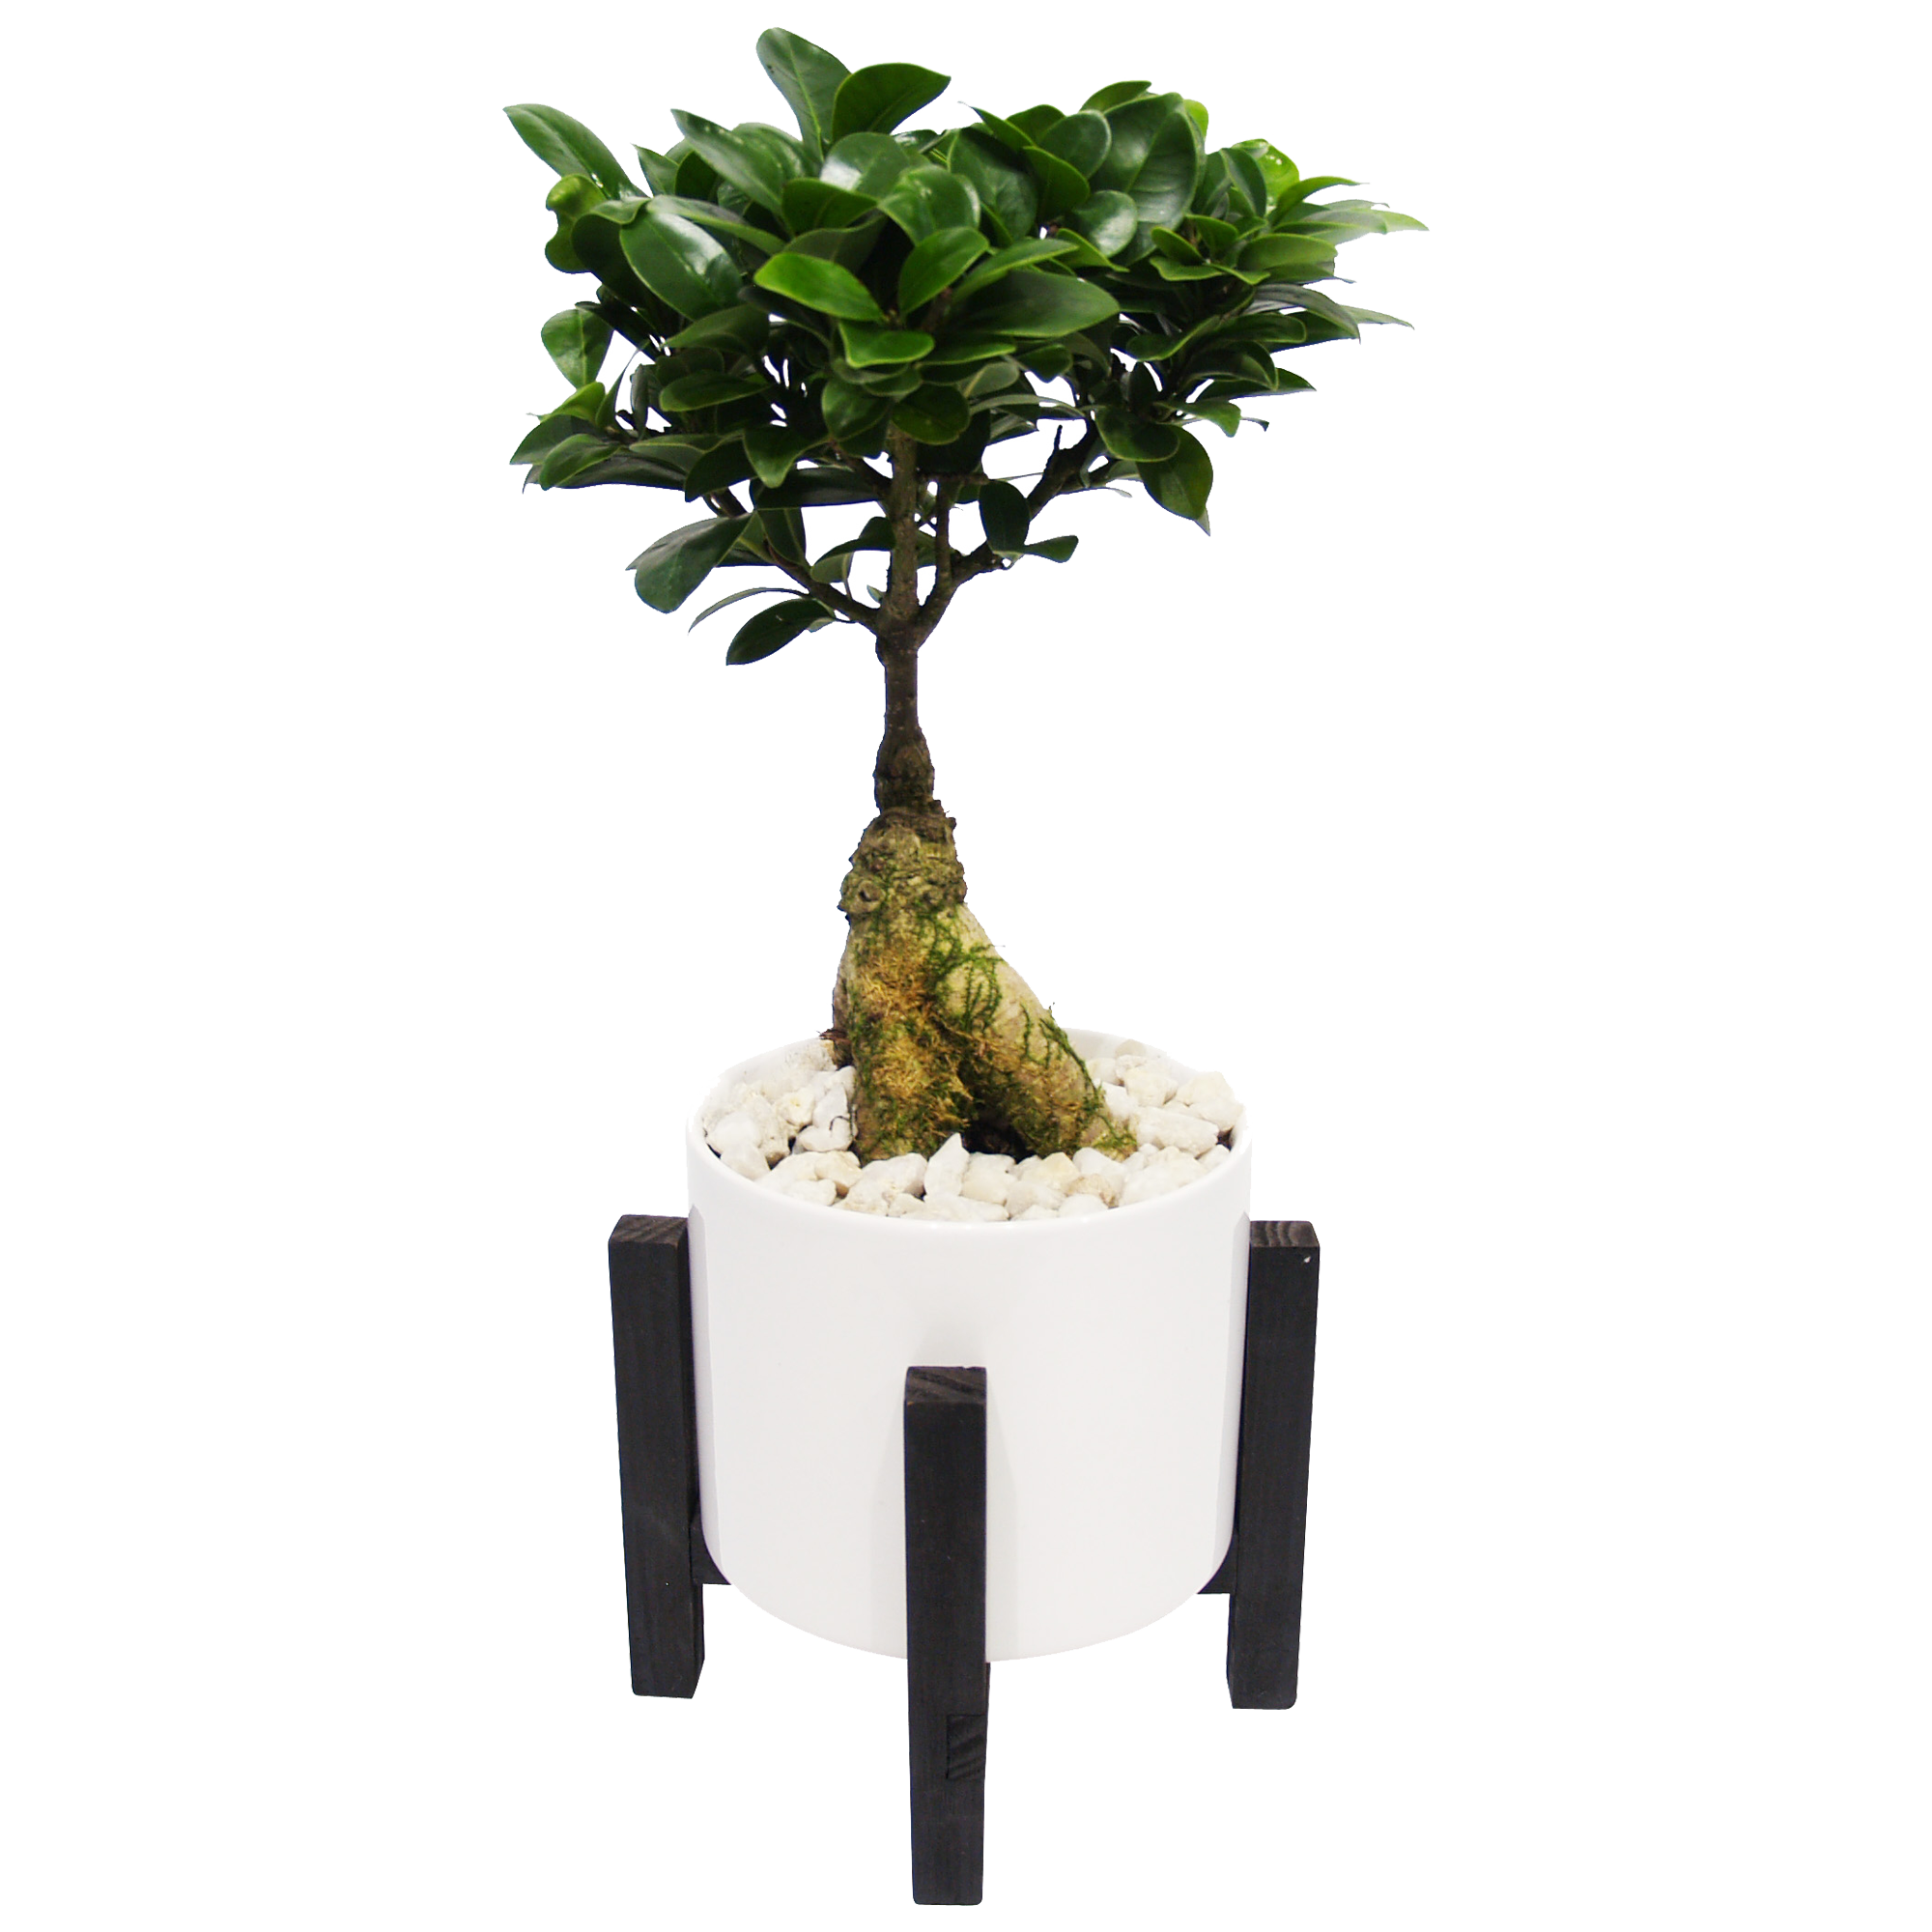 Zimmerbonsai Ficus 'Ginseng' auf Holzgestell 15 cm Topf + product picture